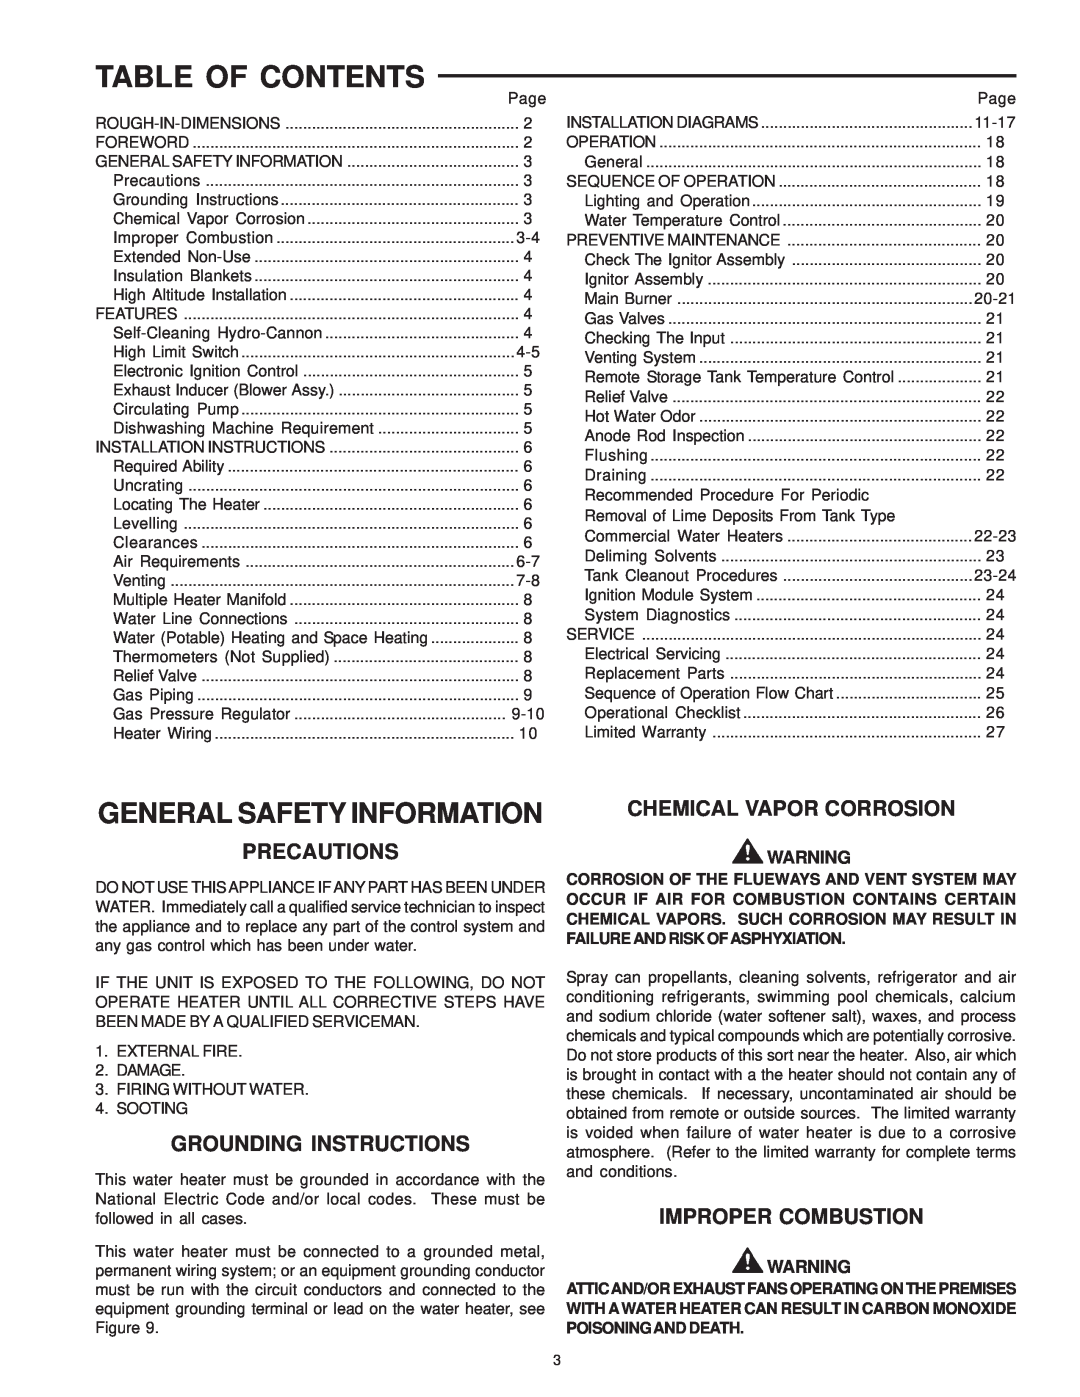 A.O. Smith SBD 30 150 warranty Table Of Contents, General Safety Information, Precautions, Grounding Instructions 